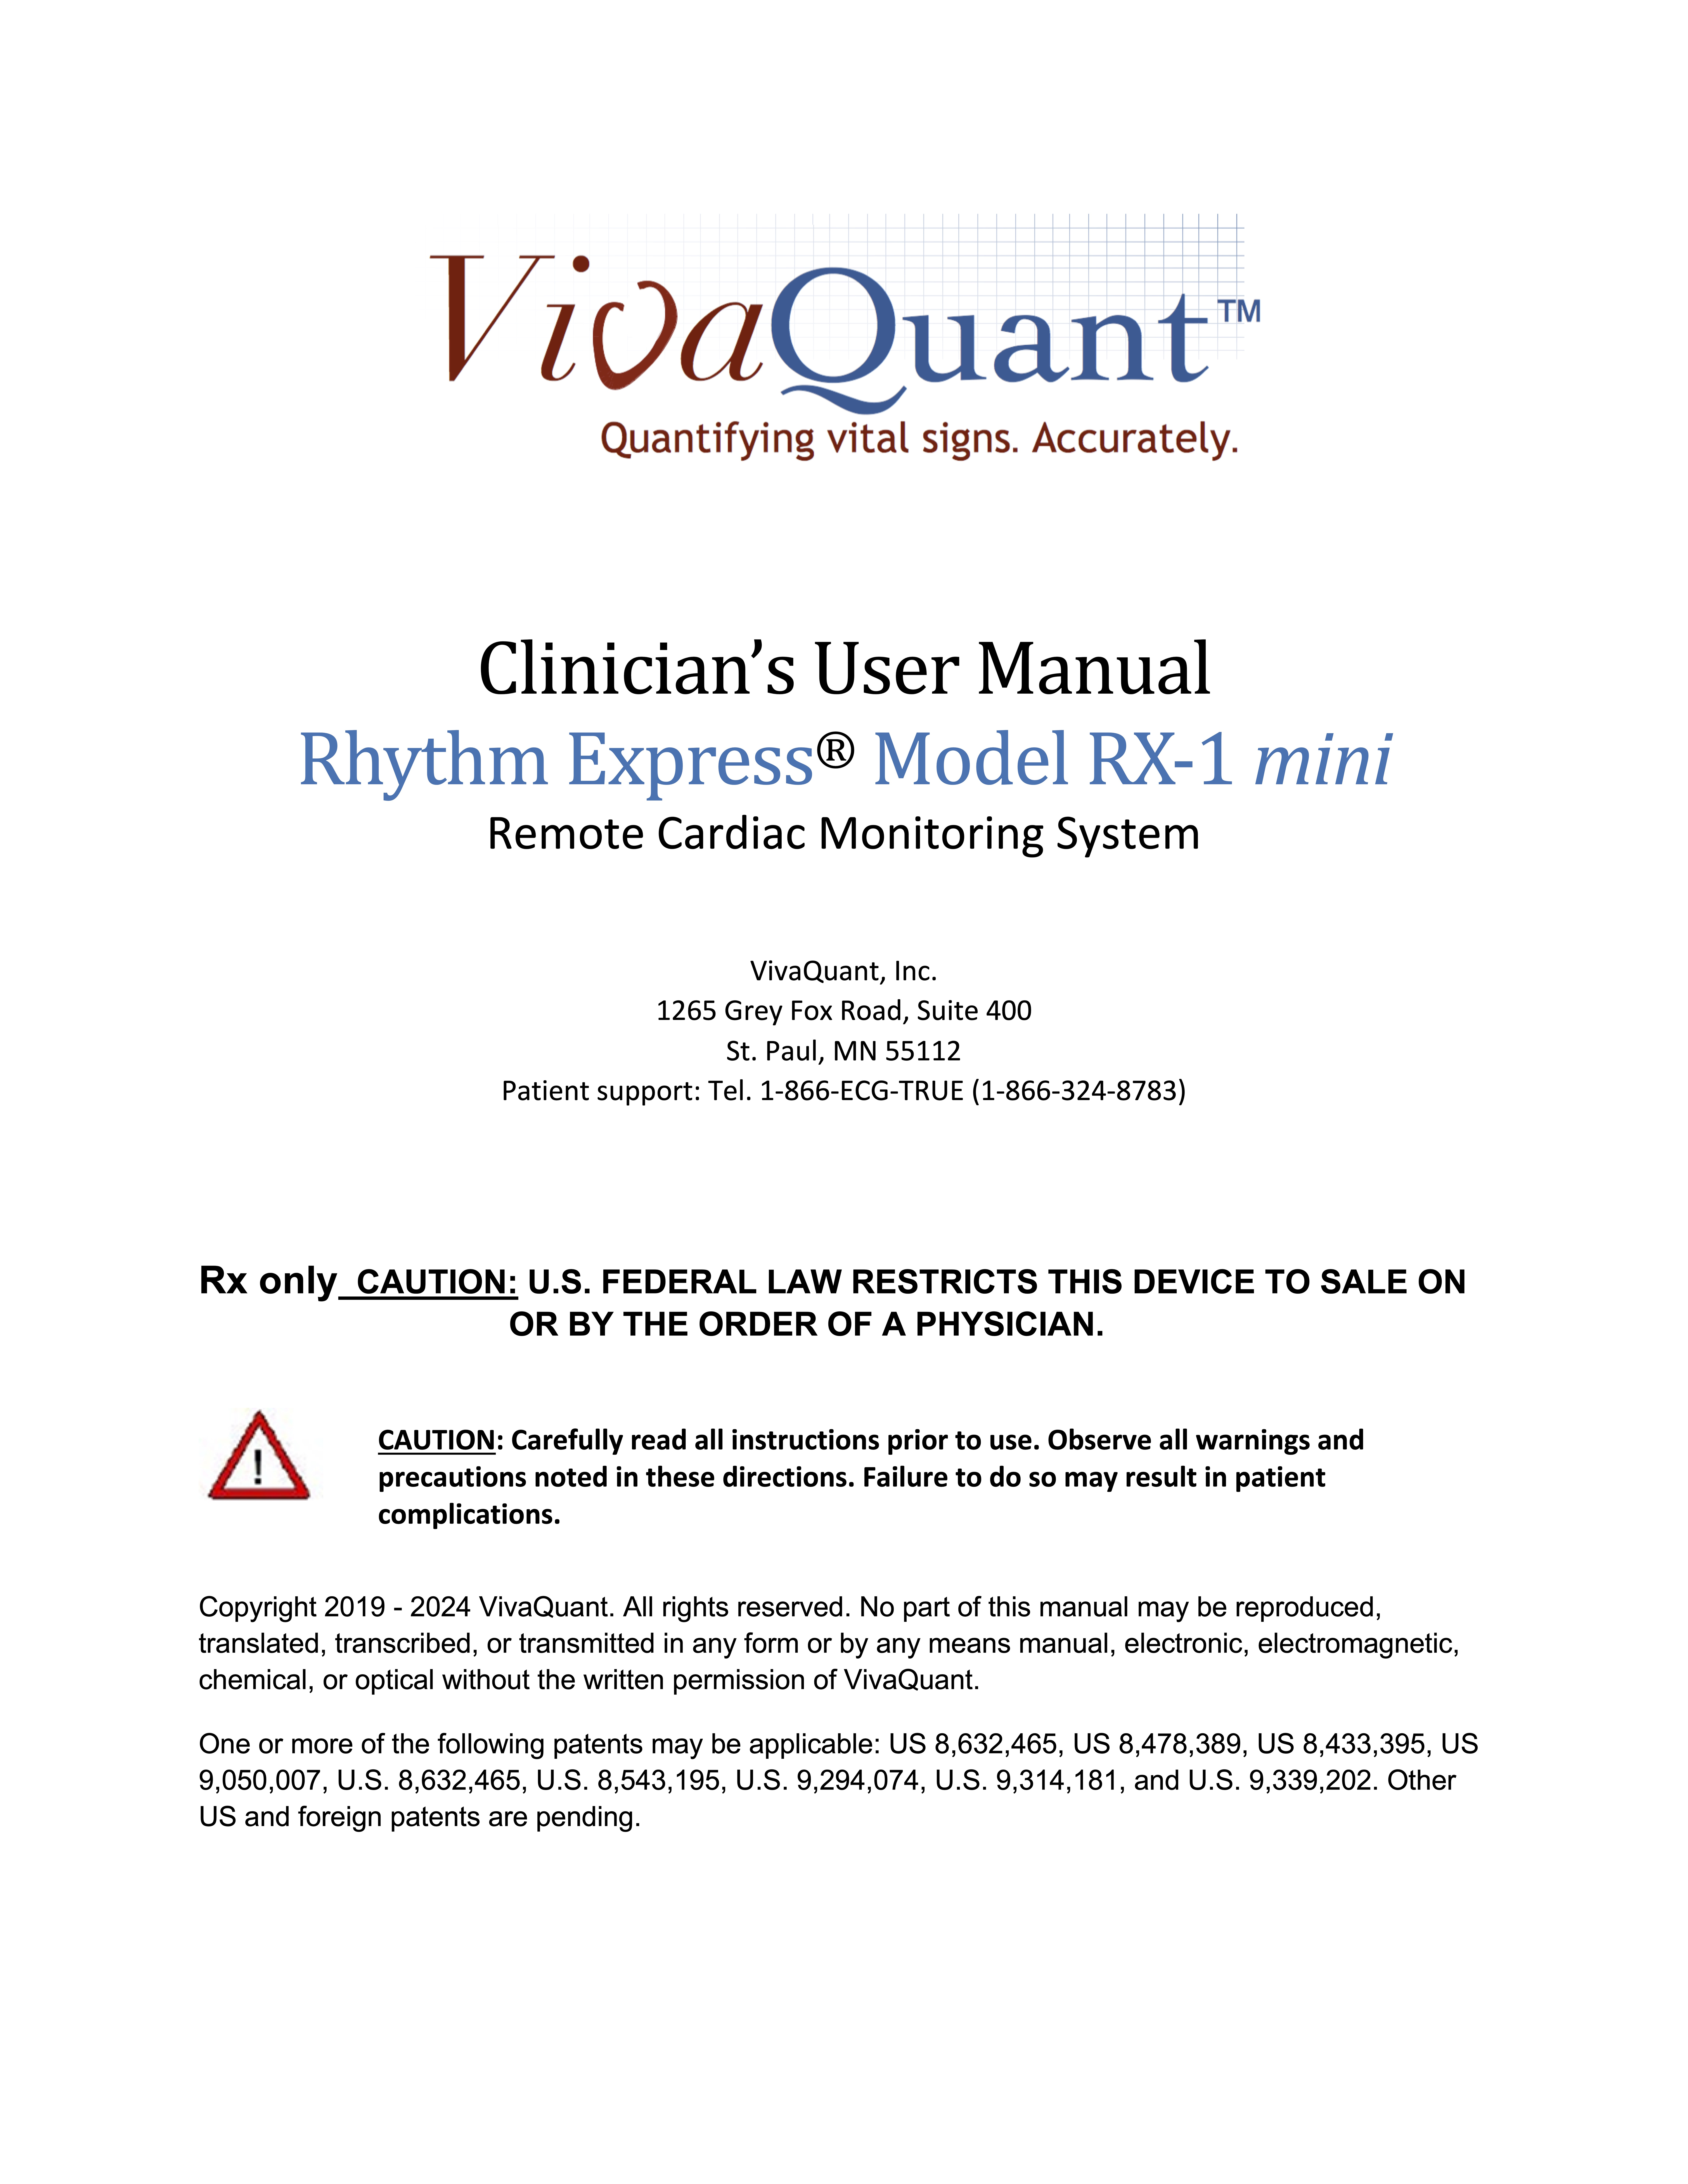 Download - Physician Use Guide